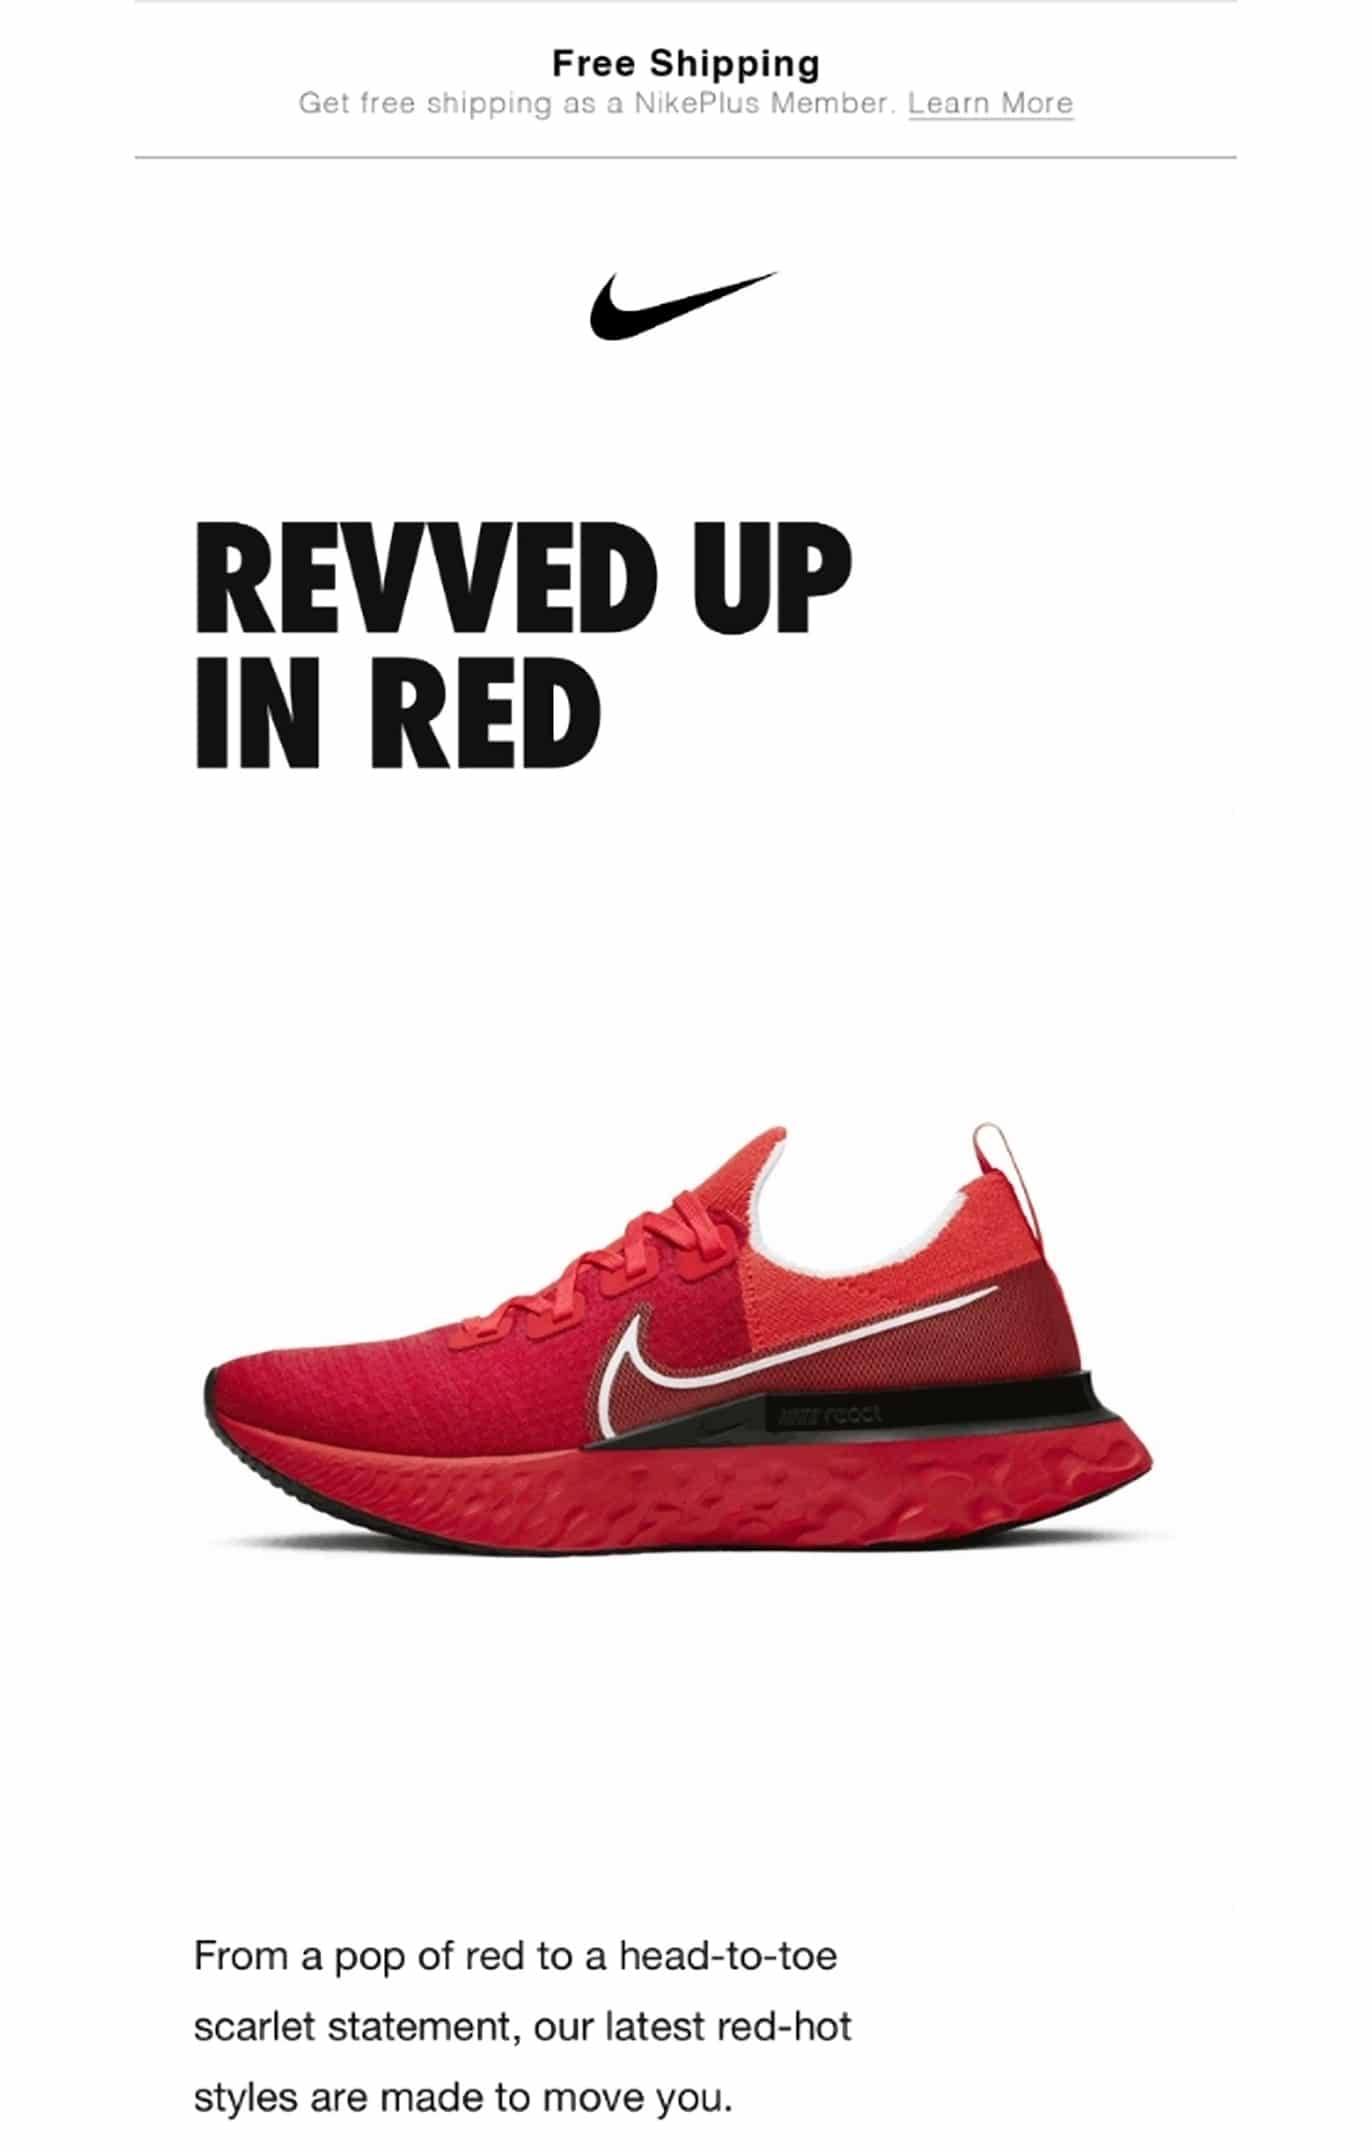  Subliminal advertising in email marketing - Nike uses color psychology 